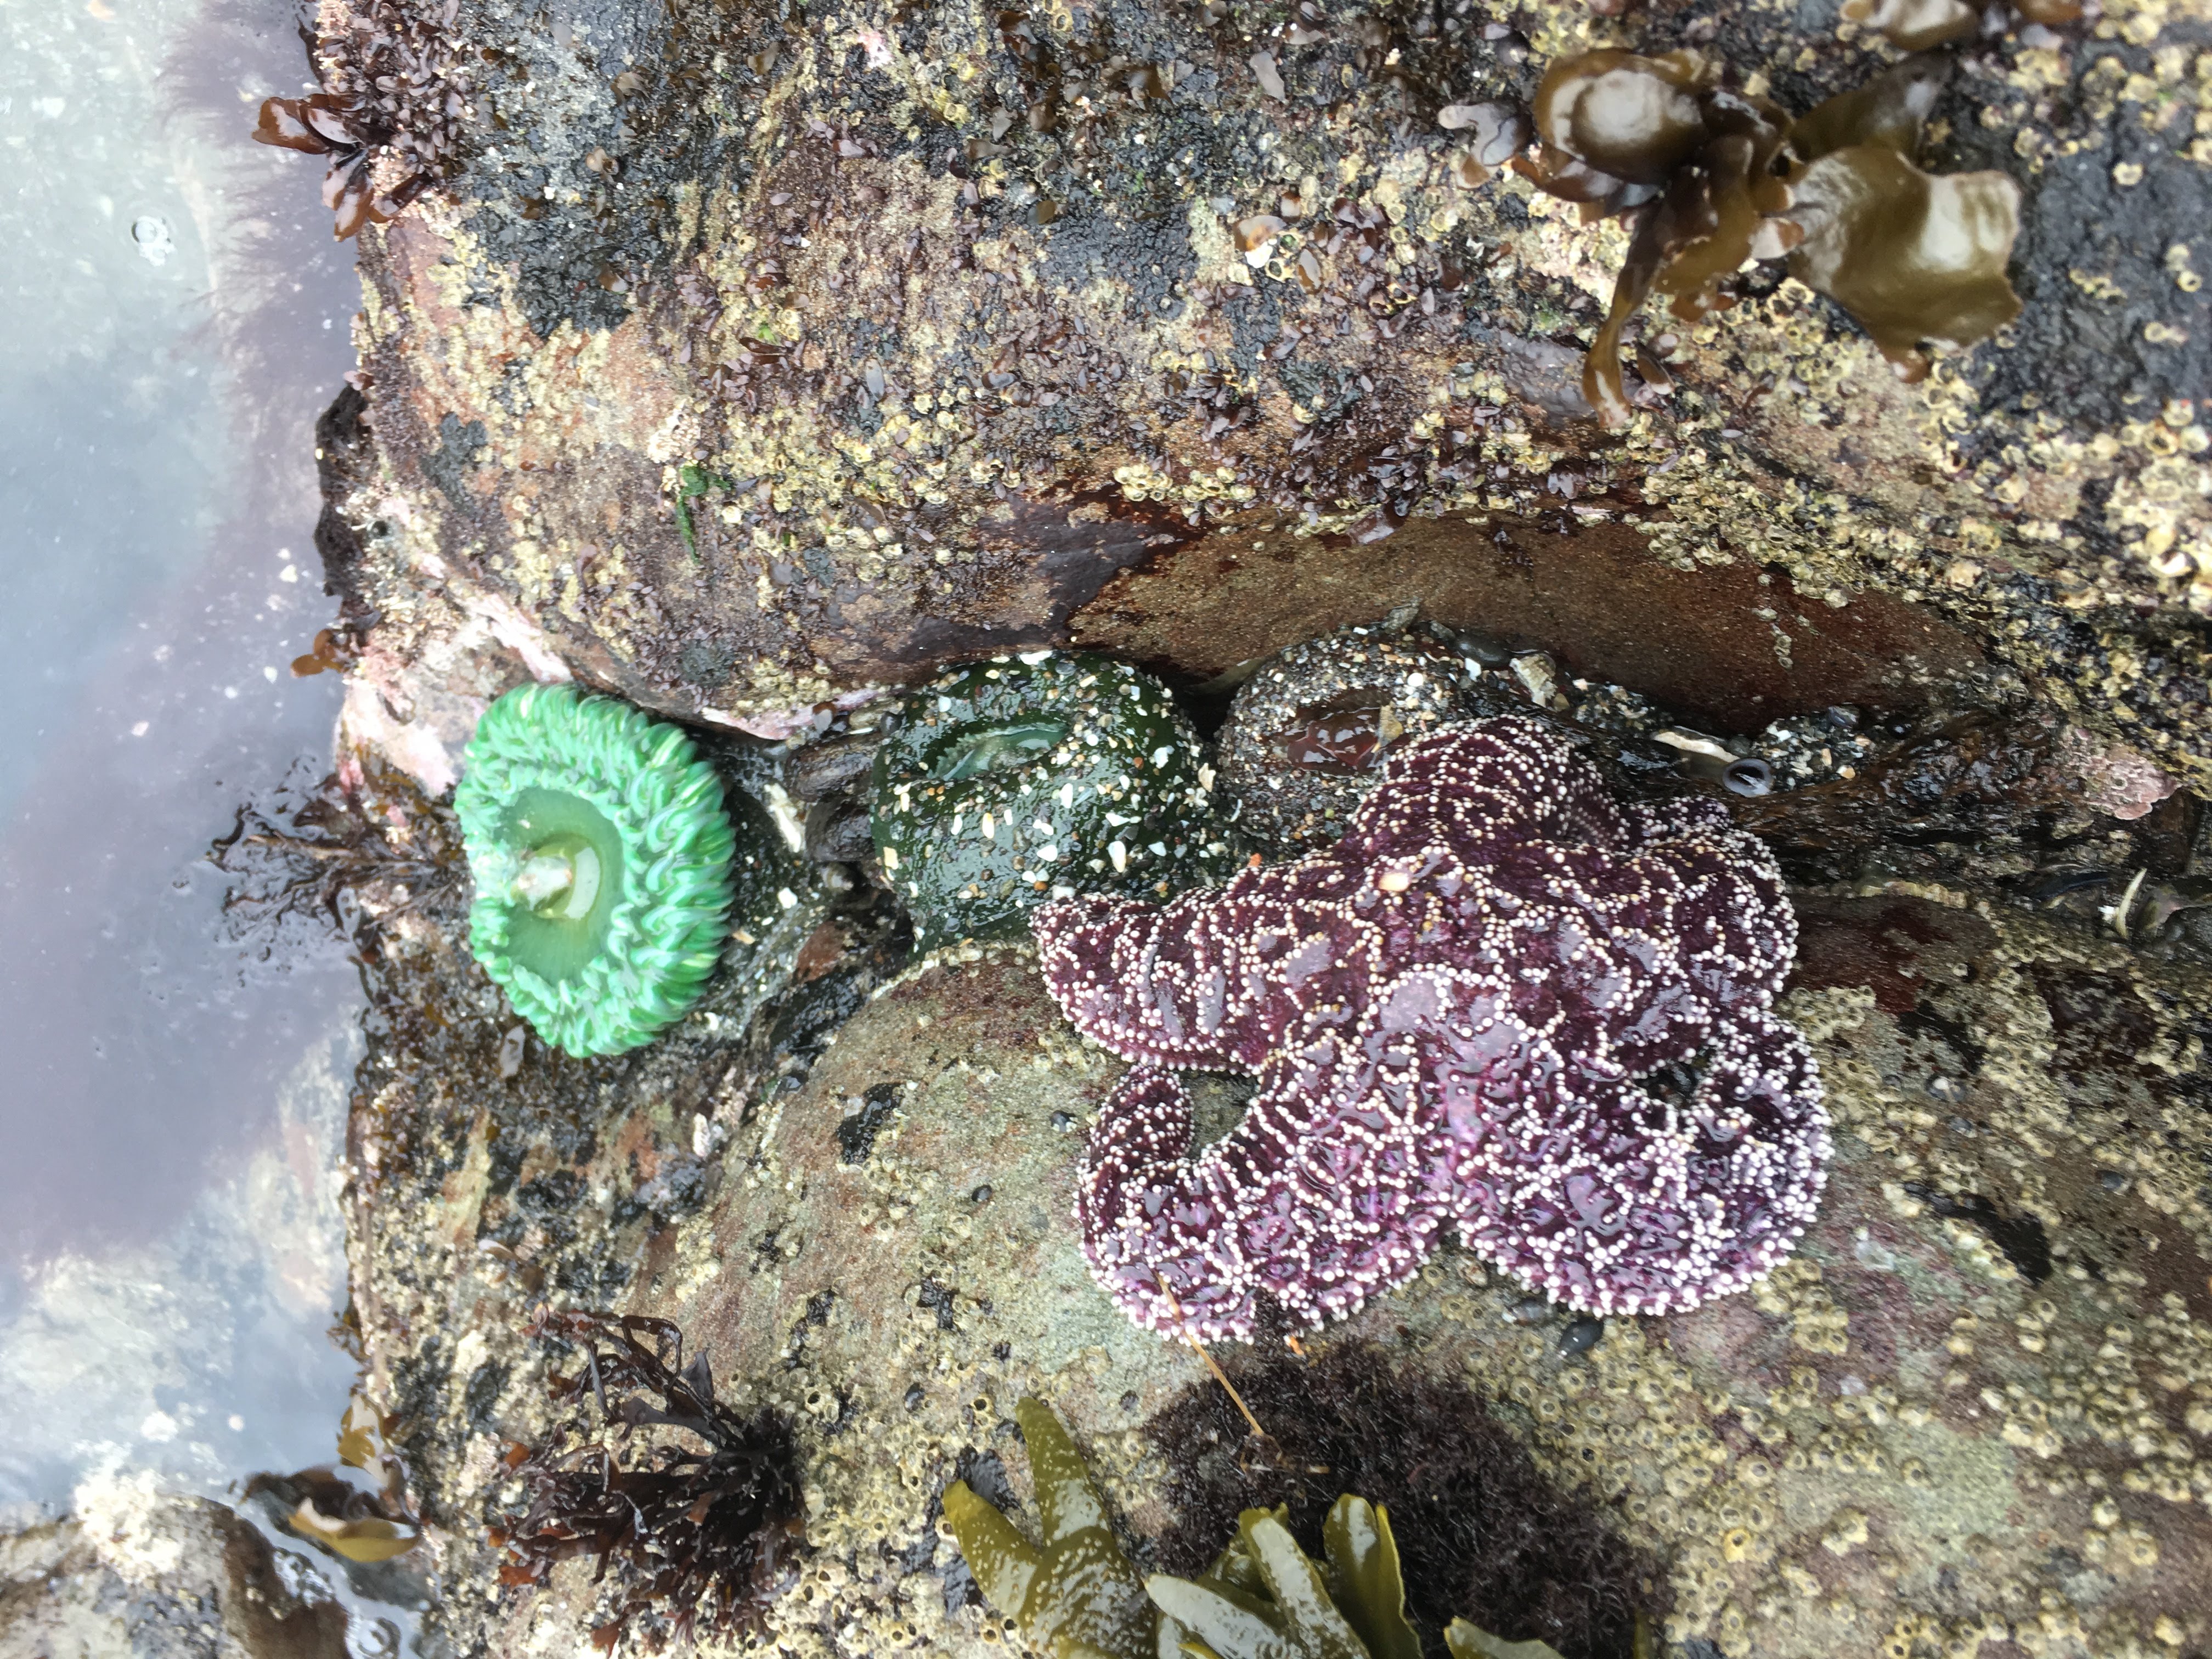 I found starfishes clinging to steep rocks right at the edge of the water during low tide.